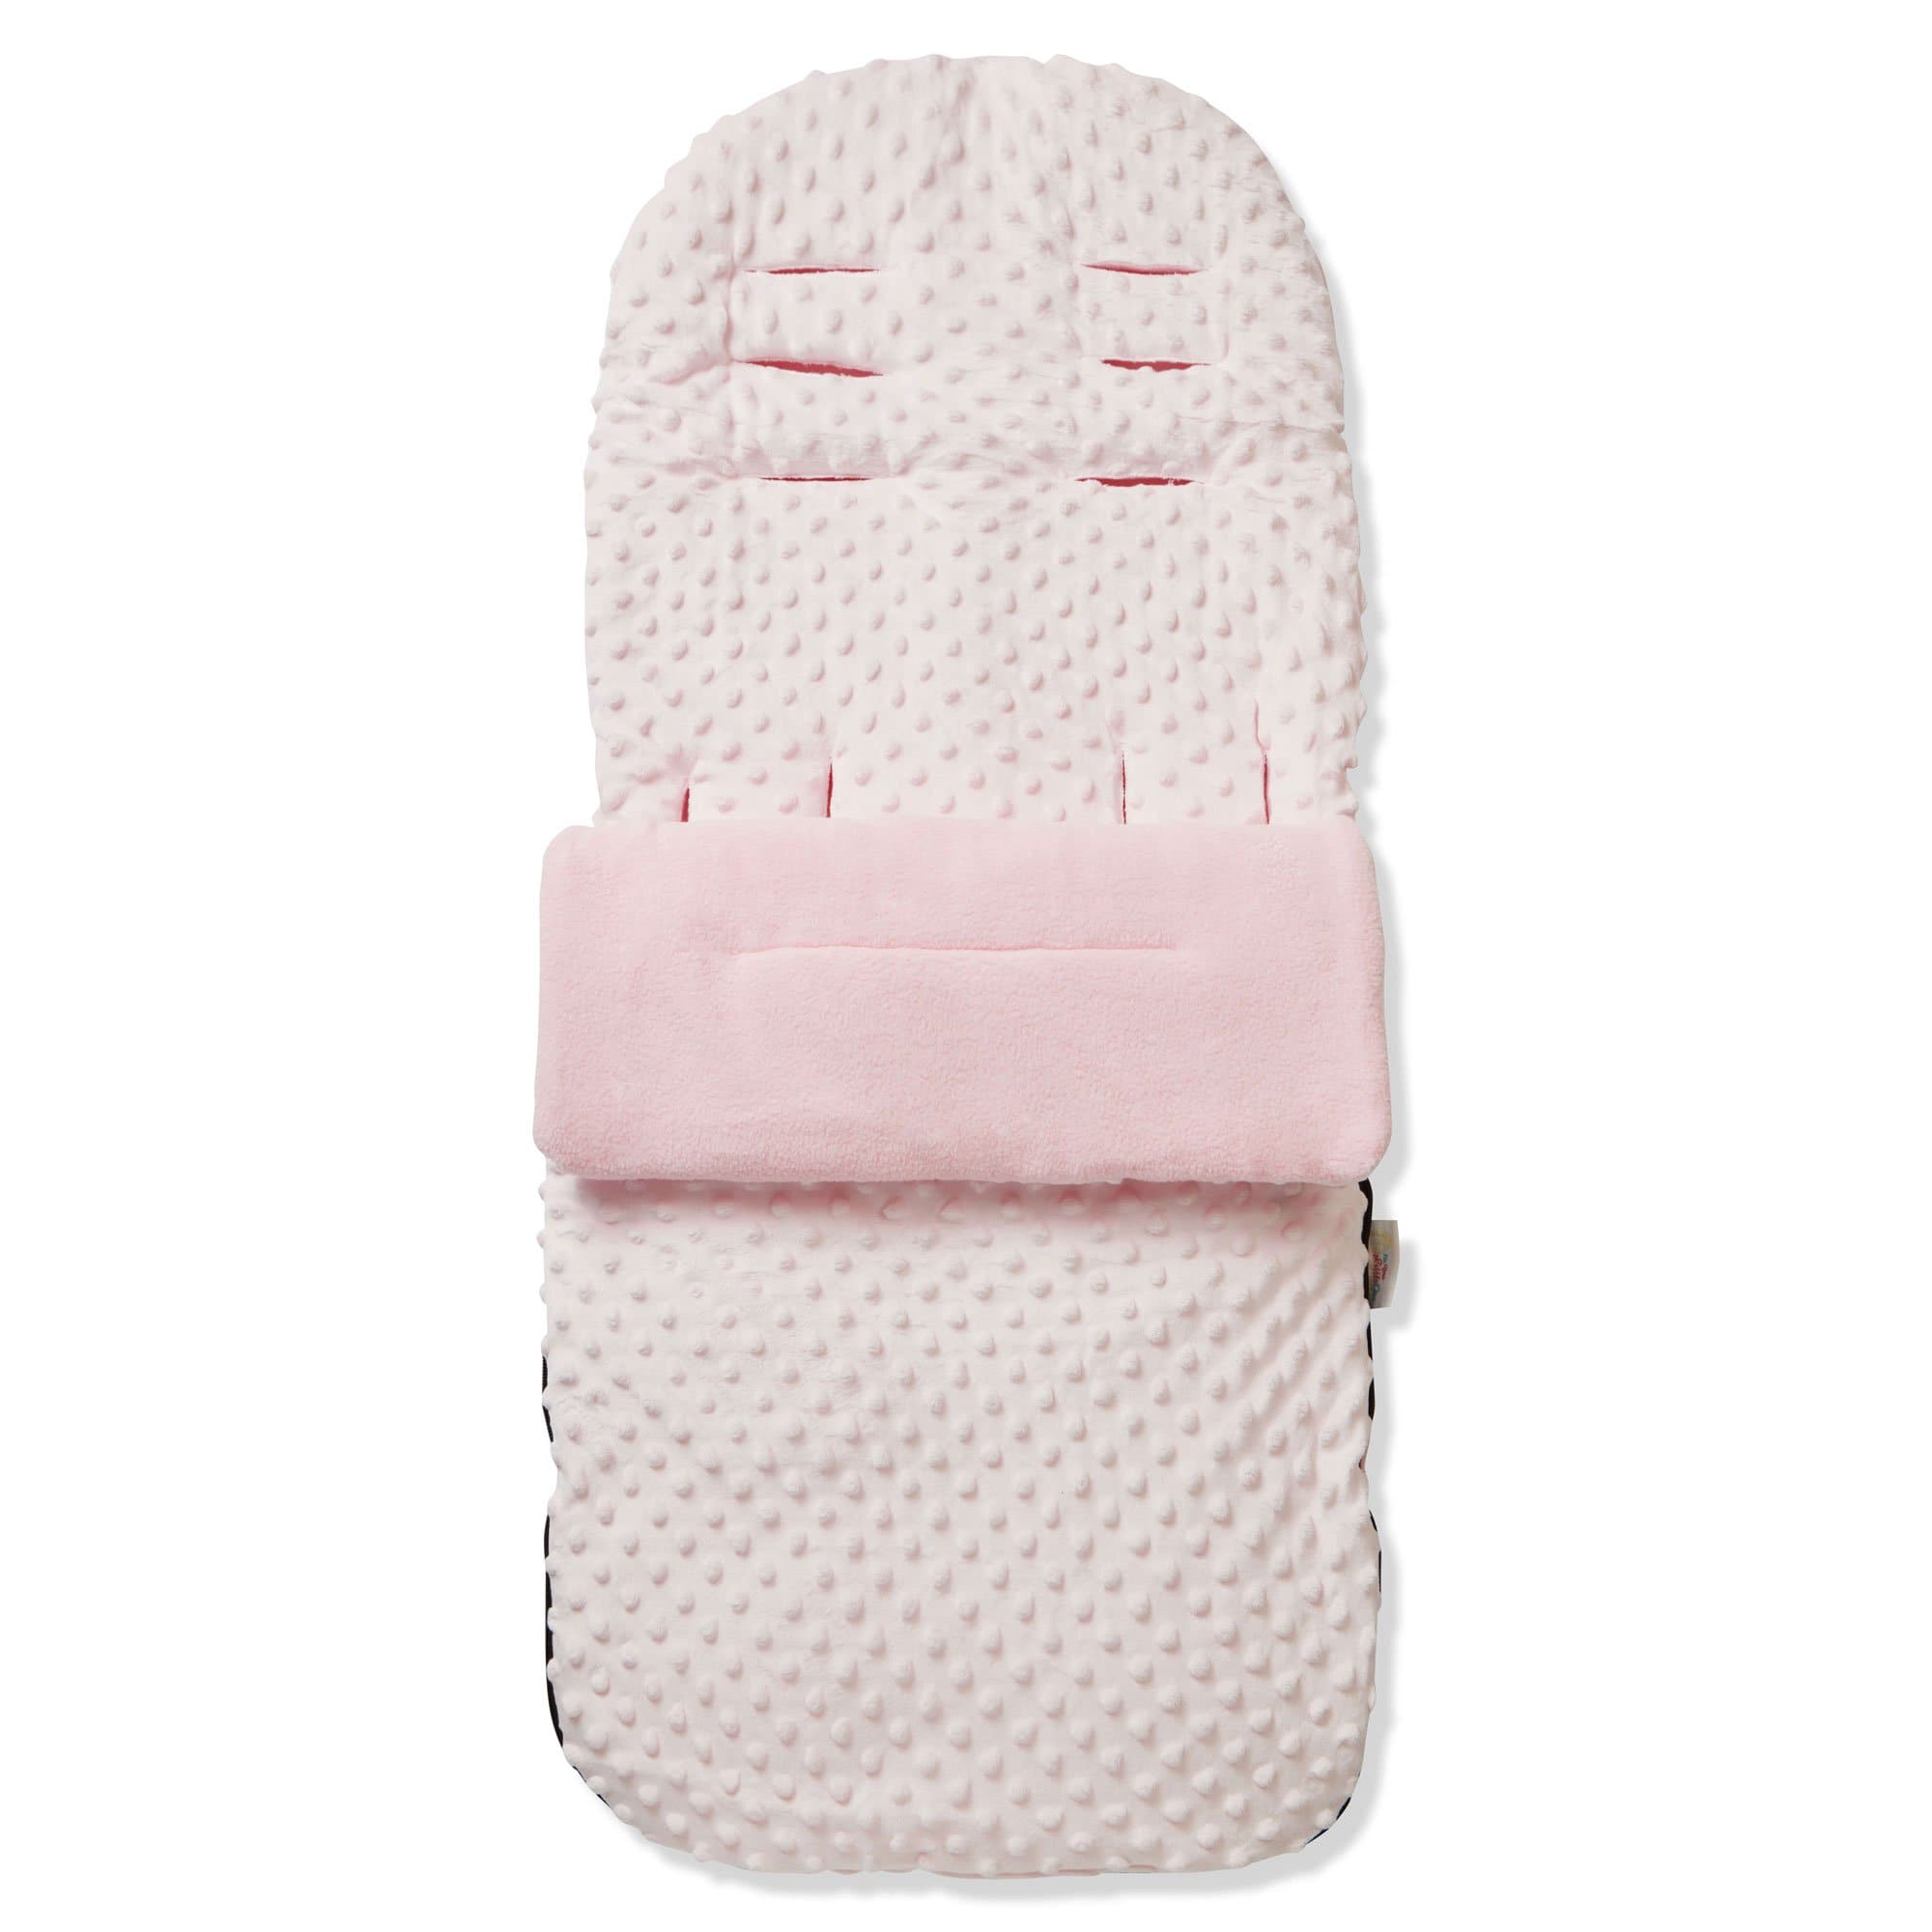 Dimple Footmuff / Cosy Toes Compatible with Urban Detour - Pink / Fits All Models | For Your Little One